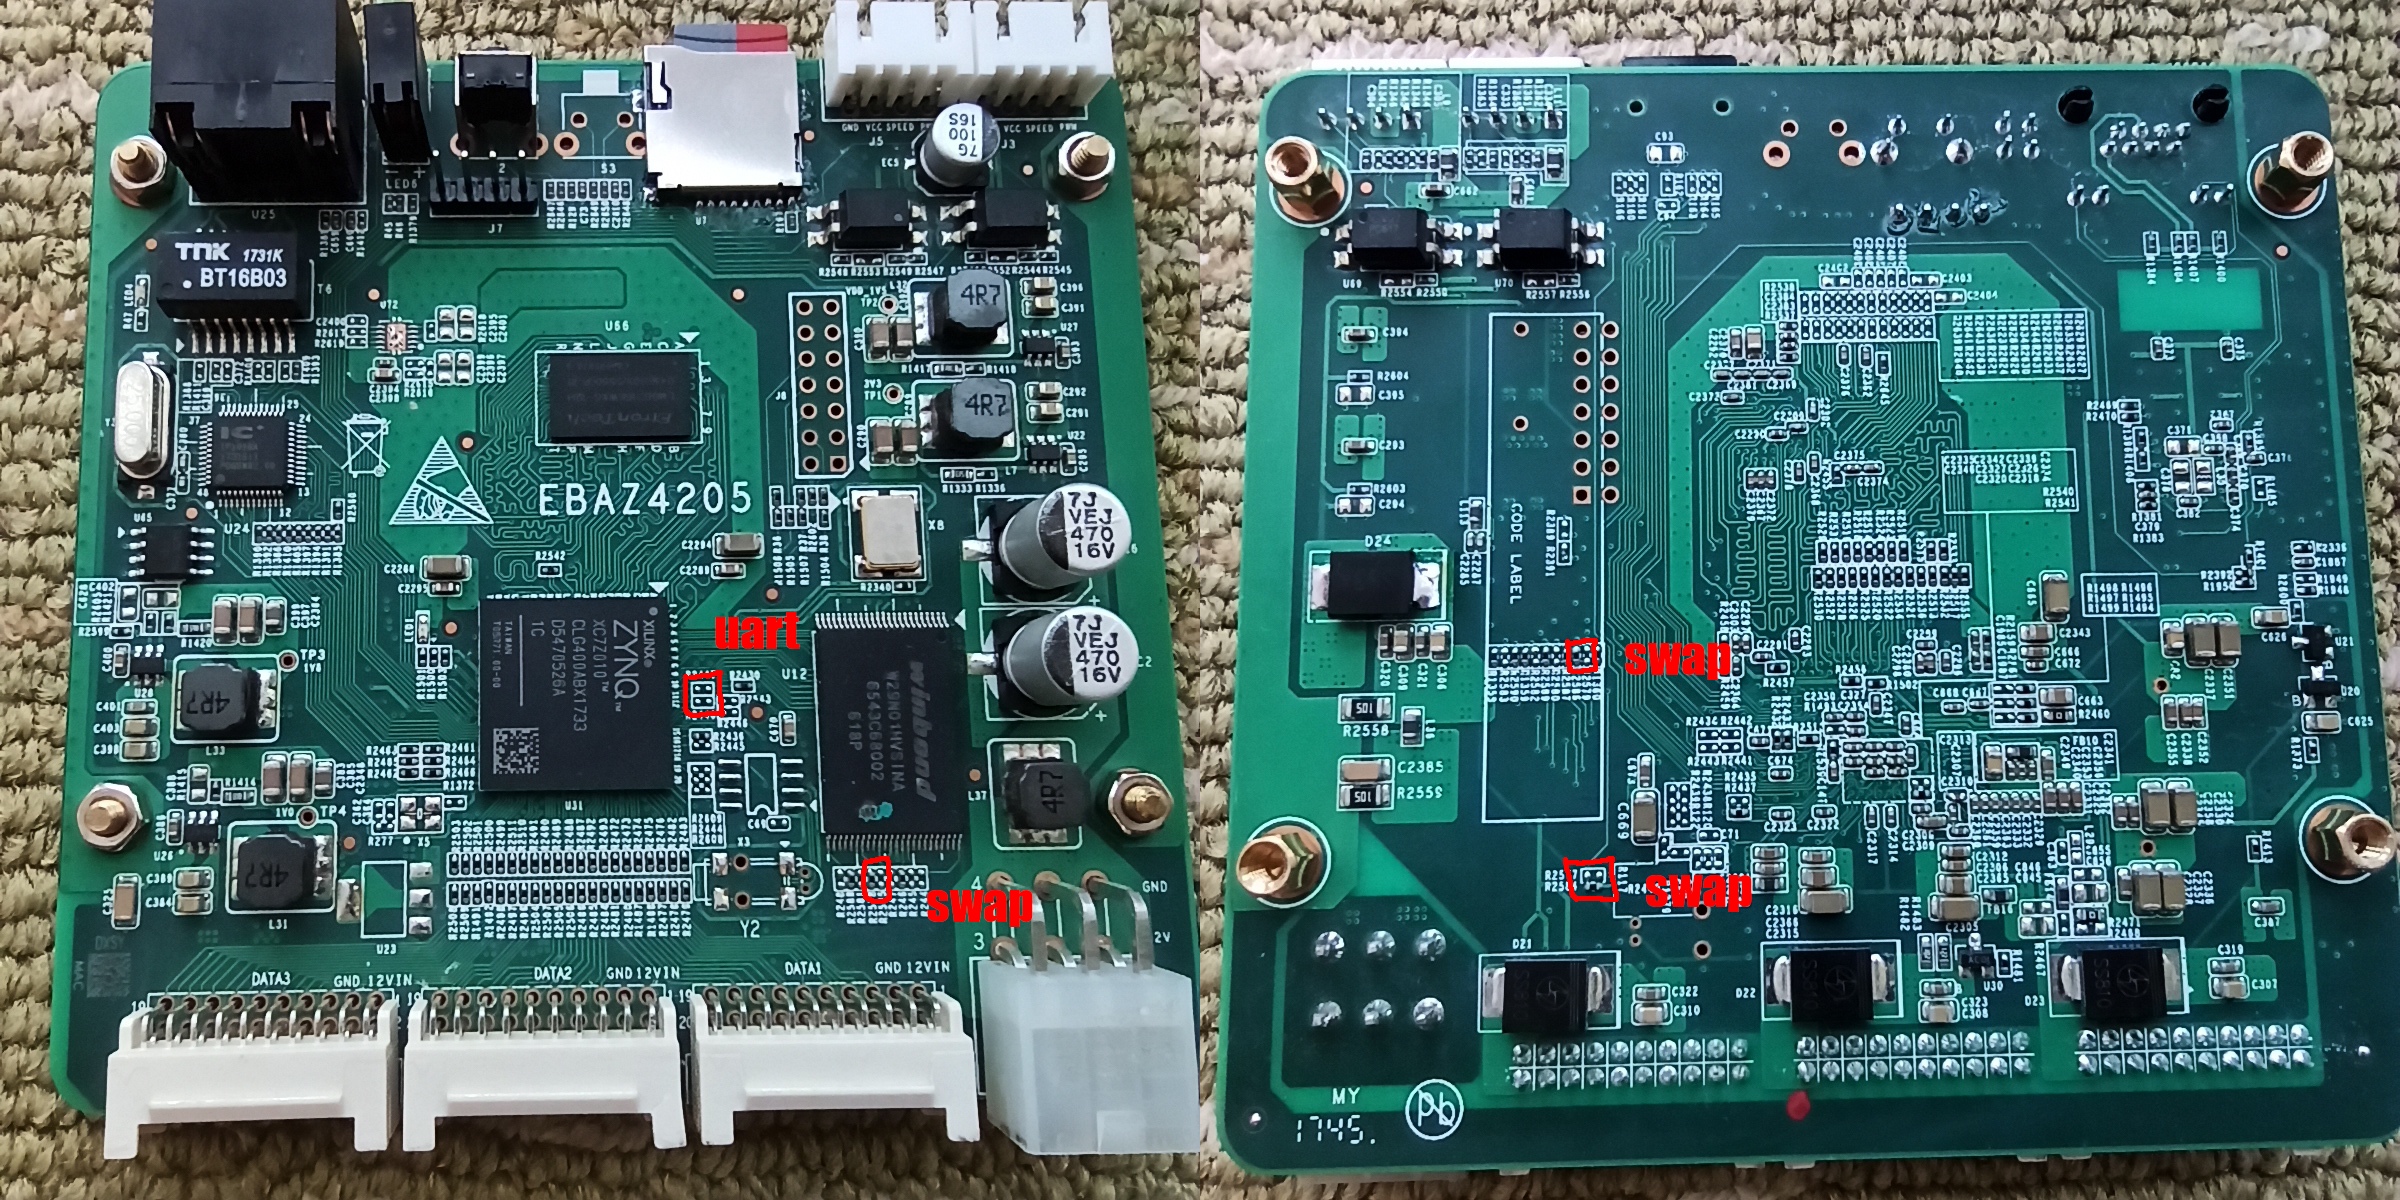 marked up image of the front and back of the ebaz4205 PCB showing the locations of the important components and pads